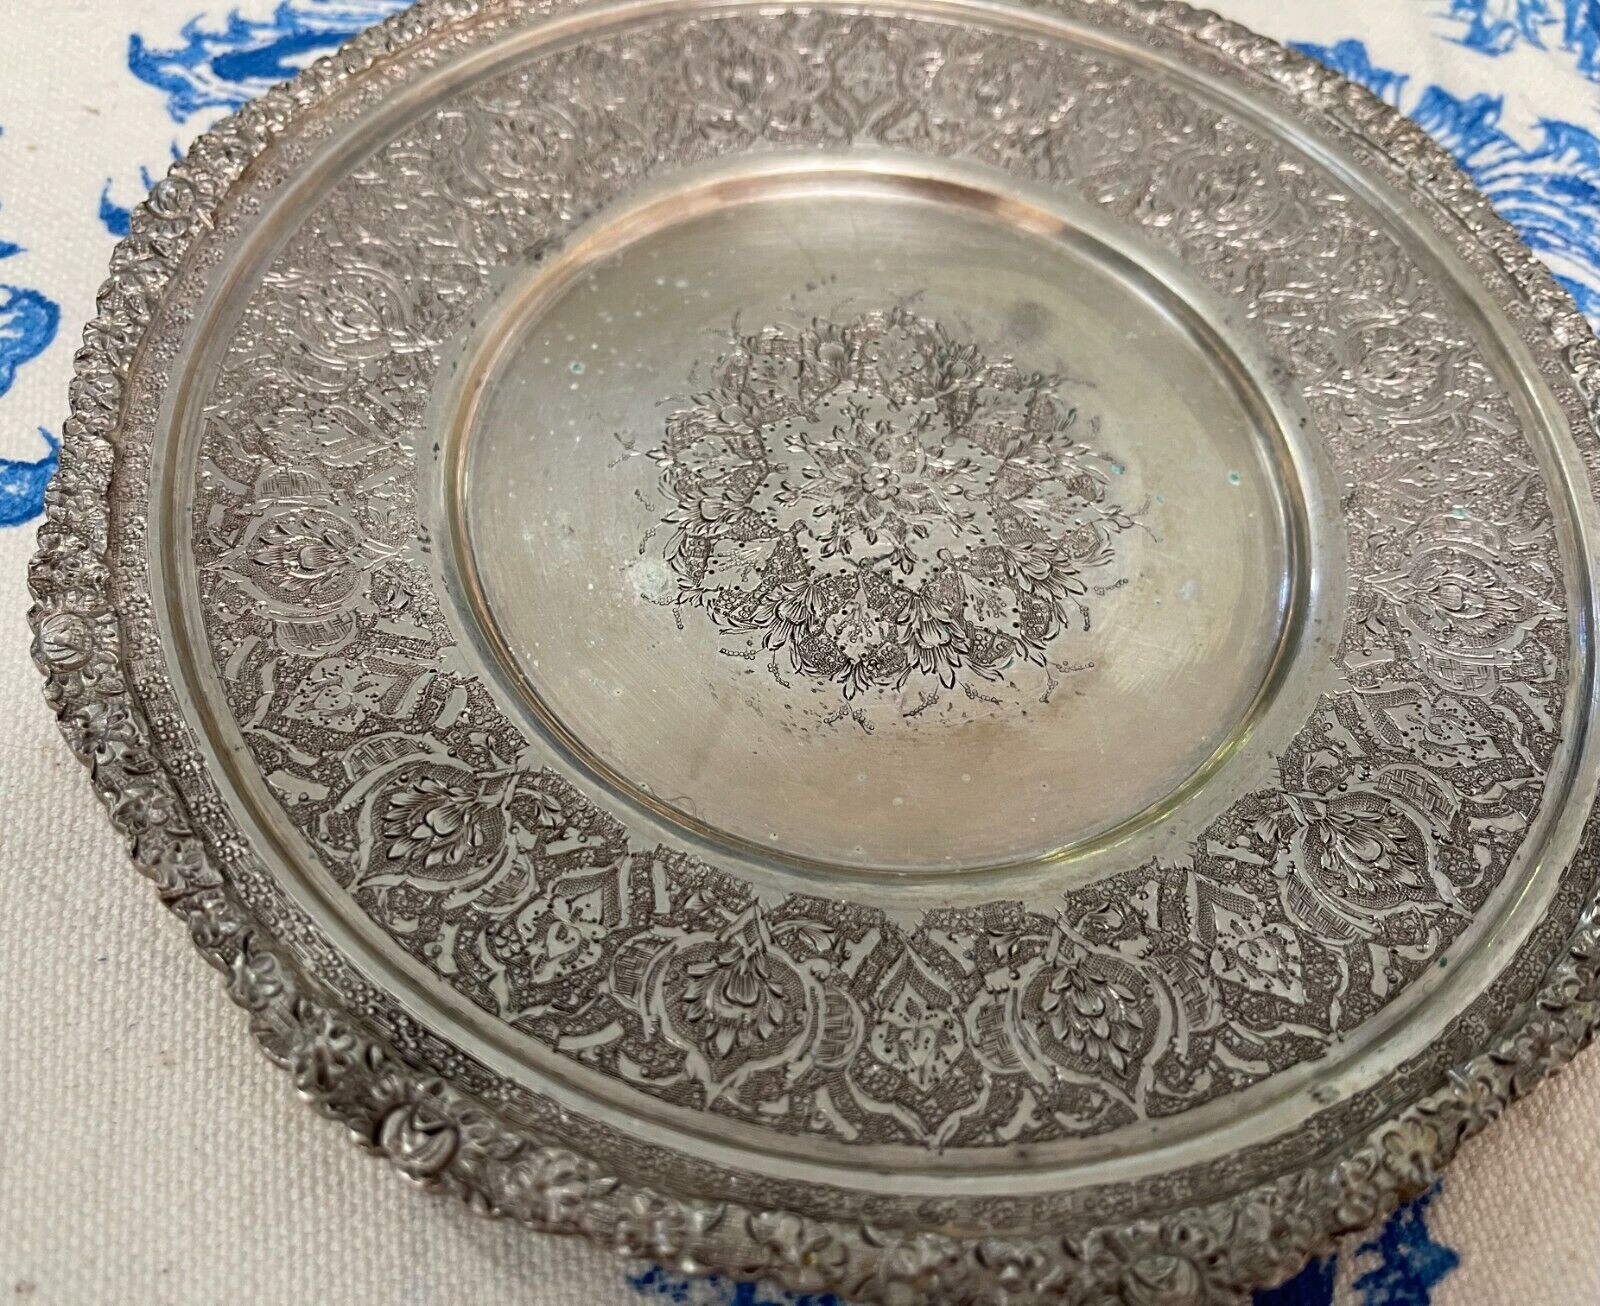 6 Plate Set AUTHENTIC Antique 84 Silver Persian Islamic middle eastern Art  Без бренда - фотография #5